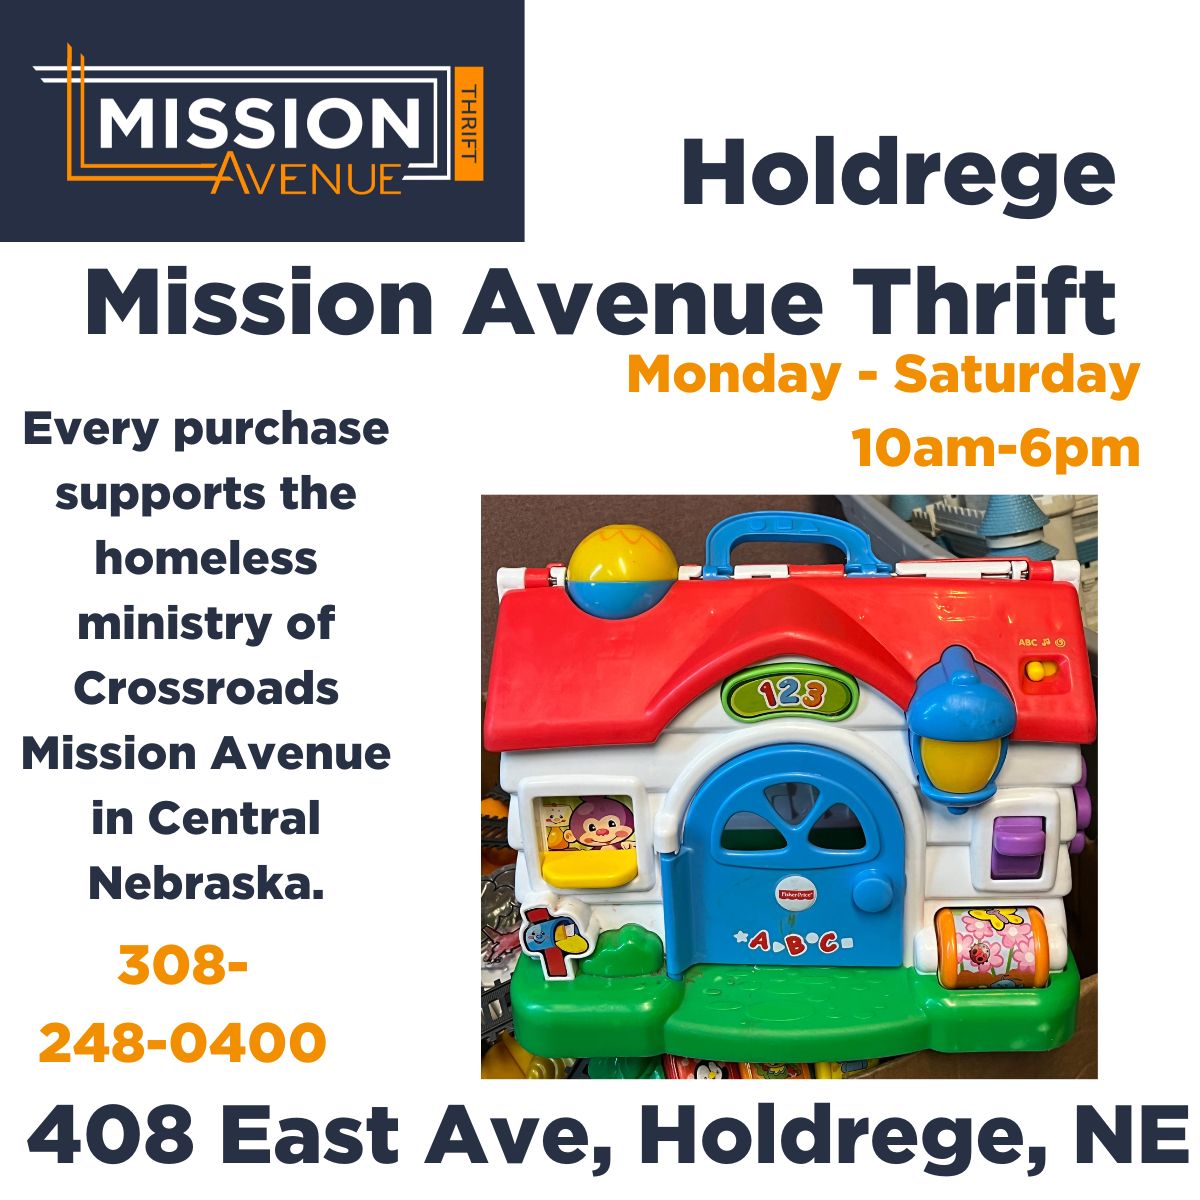 Come in TODAY and see what's NEW at Holdrege Mission Avenue Thrift! crossroadsmission.com/thrift-stores/ #MissionAvenueThrift #HoldregeNebraska #Thriftstore #Shoptoday